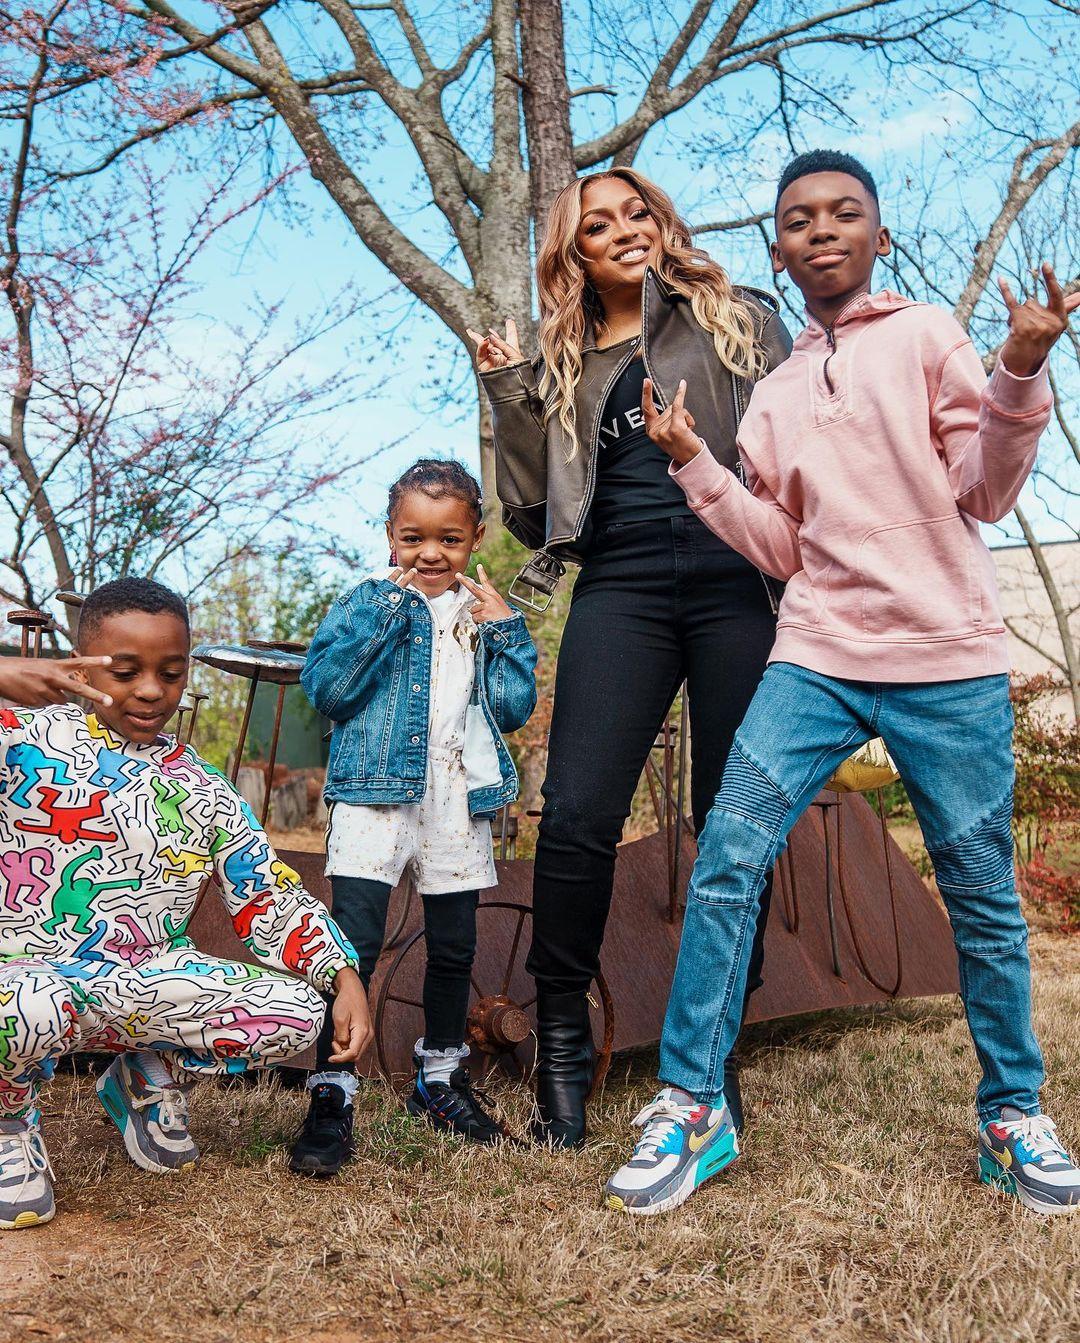 RHOA's Drew Sidora Talks Being 'Strong' For Her Kids Amid 'Difficult & Challenging' Time